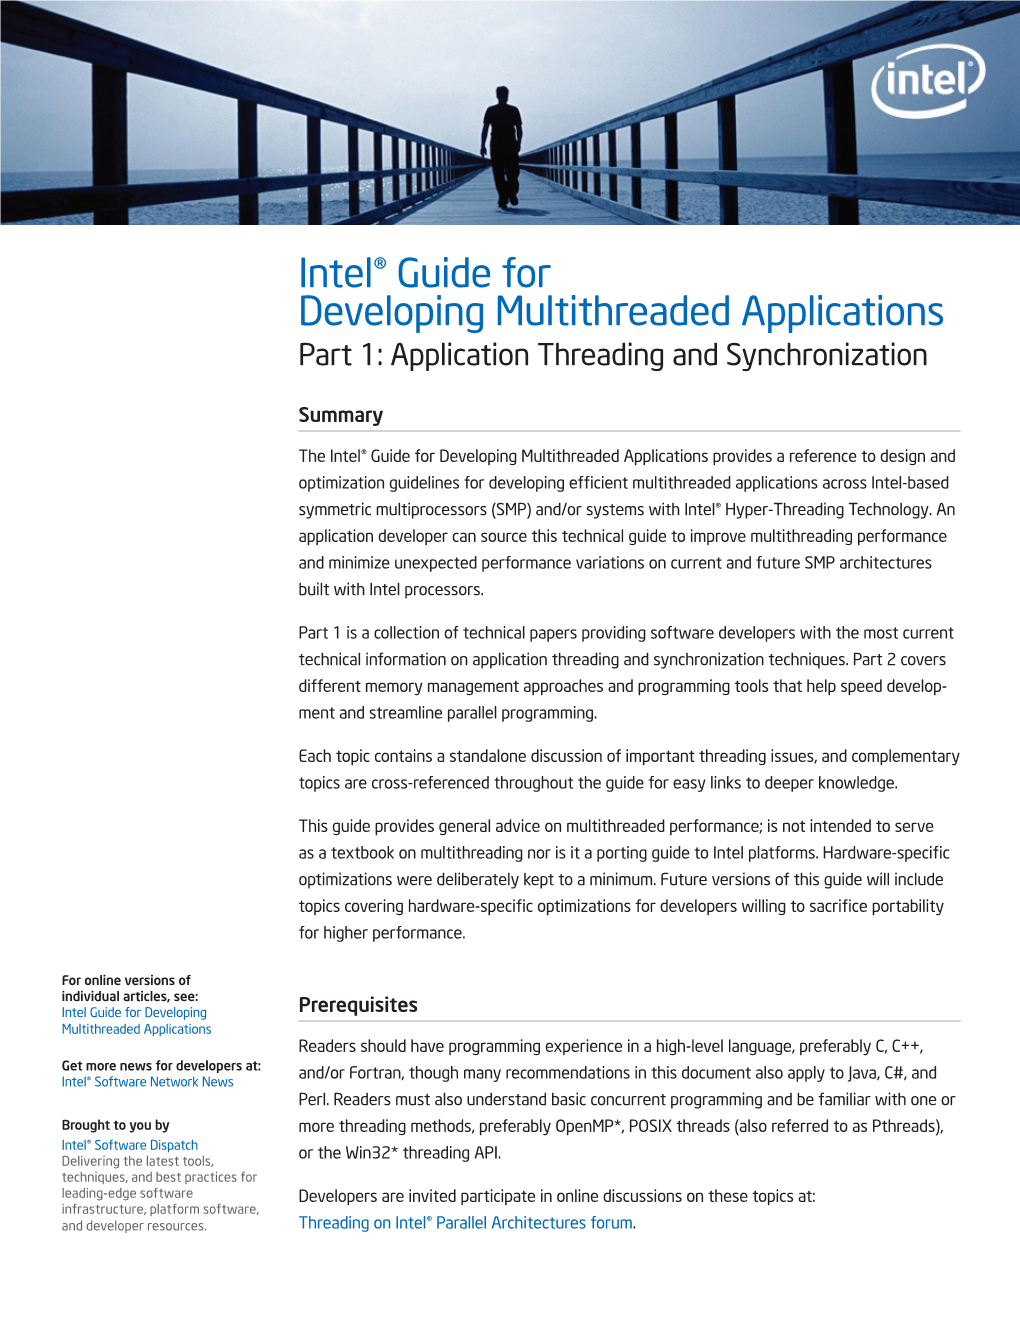 Intel® Guide for Developing Multithreaded Applications Part 1: Application Threading and Synchronization